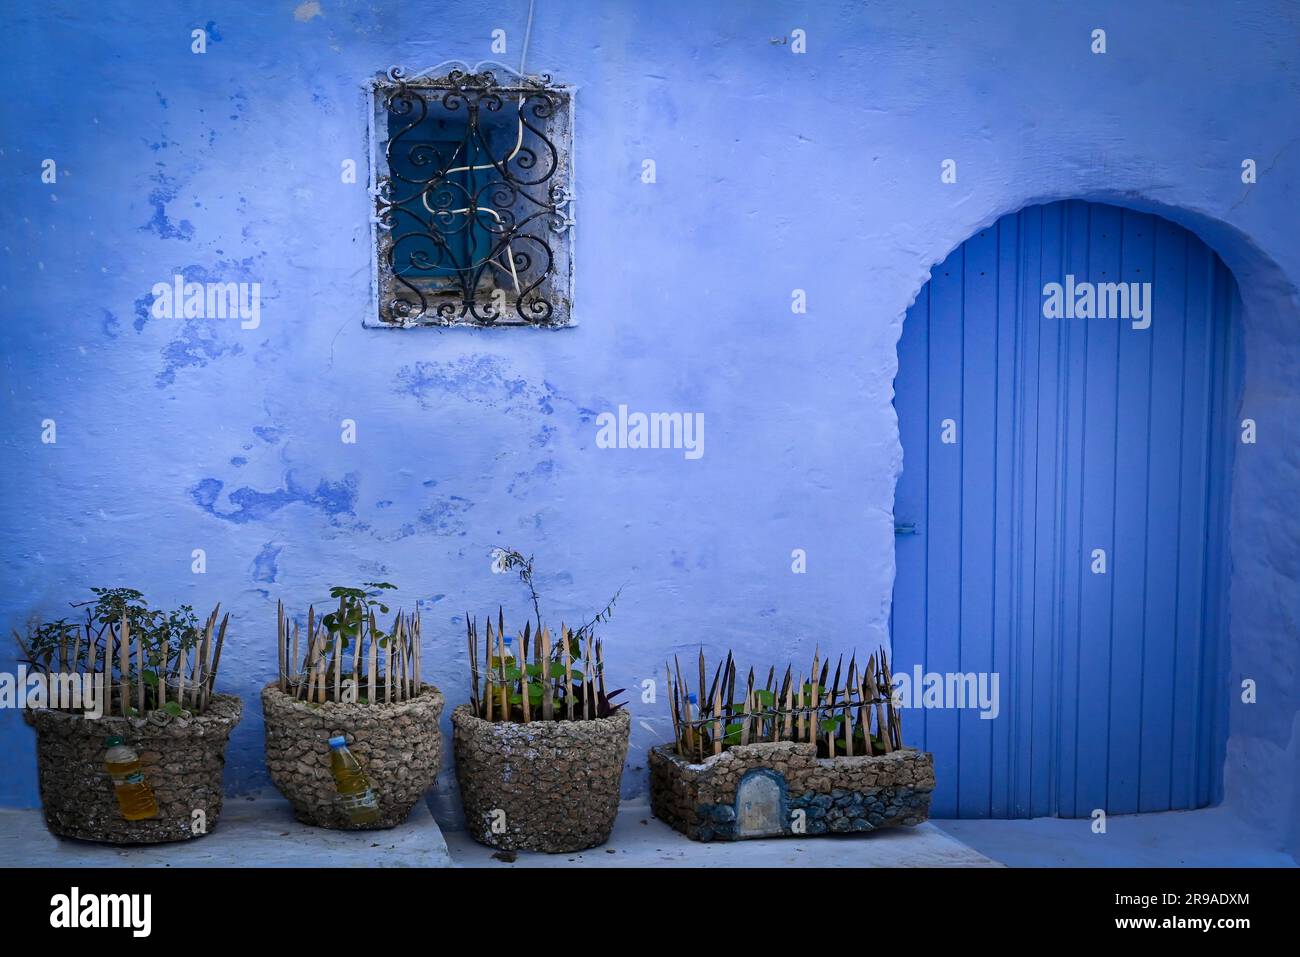 A mesmerizing ancient blue home with a blue door and rock planters with  deterrent spikes in Moroccan traditional architecture in Chefchaouen, Morocco Stock Photo